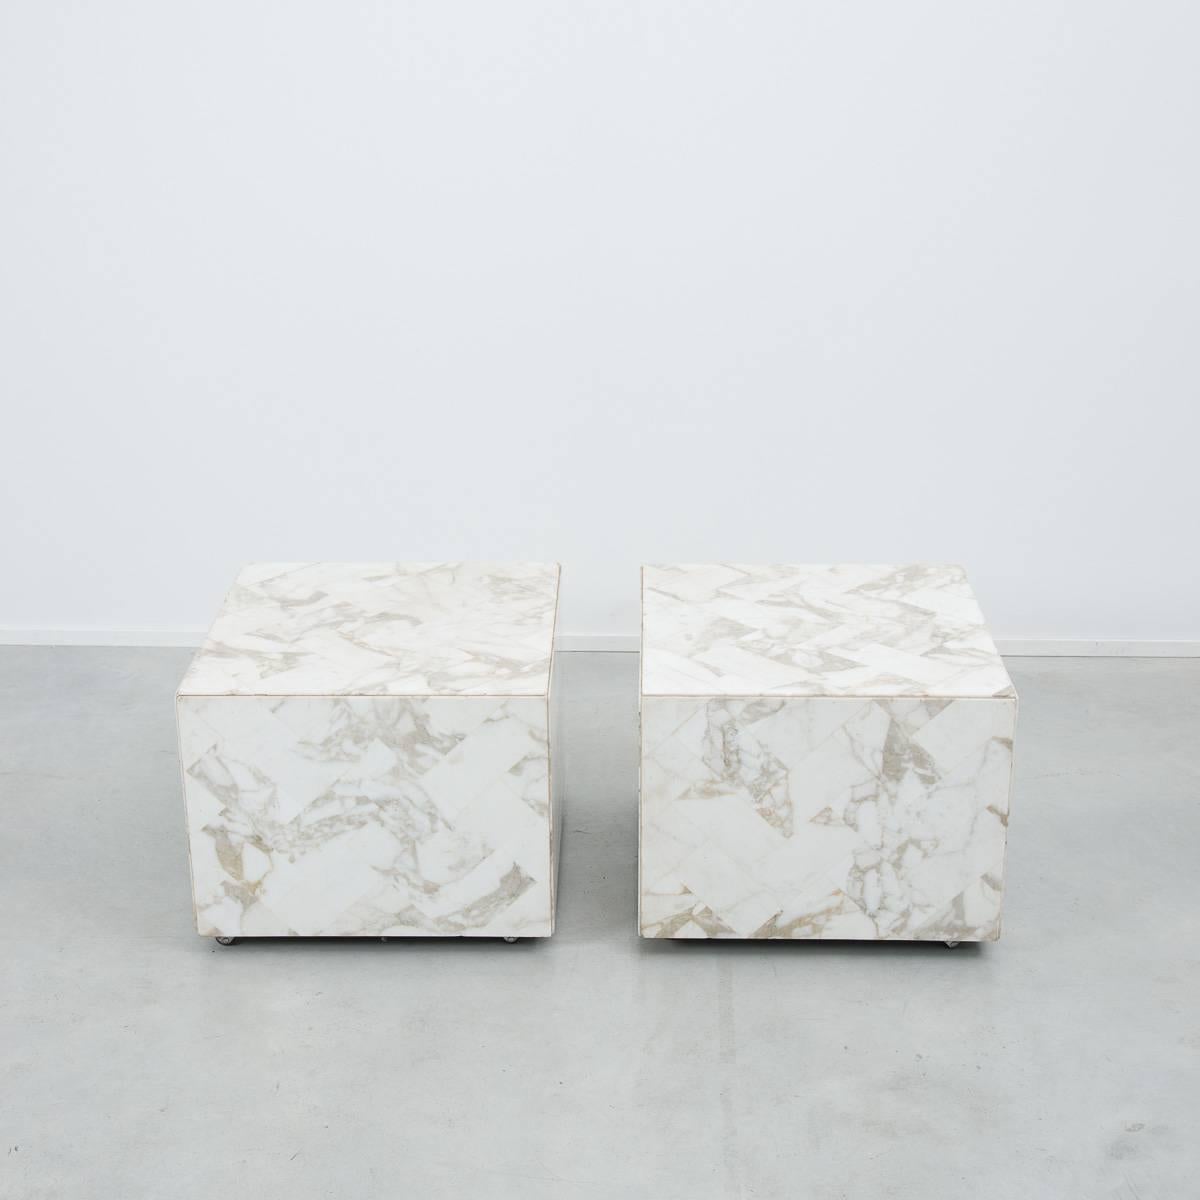 This handsome pair of marble tables on small caster wheels would make great display plinths for prized objects or an elegant set of side or bedside tables. The surfaces of the tables are created using a chic rectangular marble tile applied in a